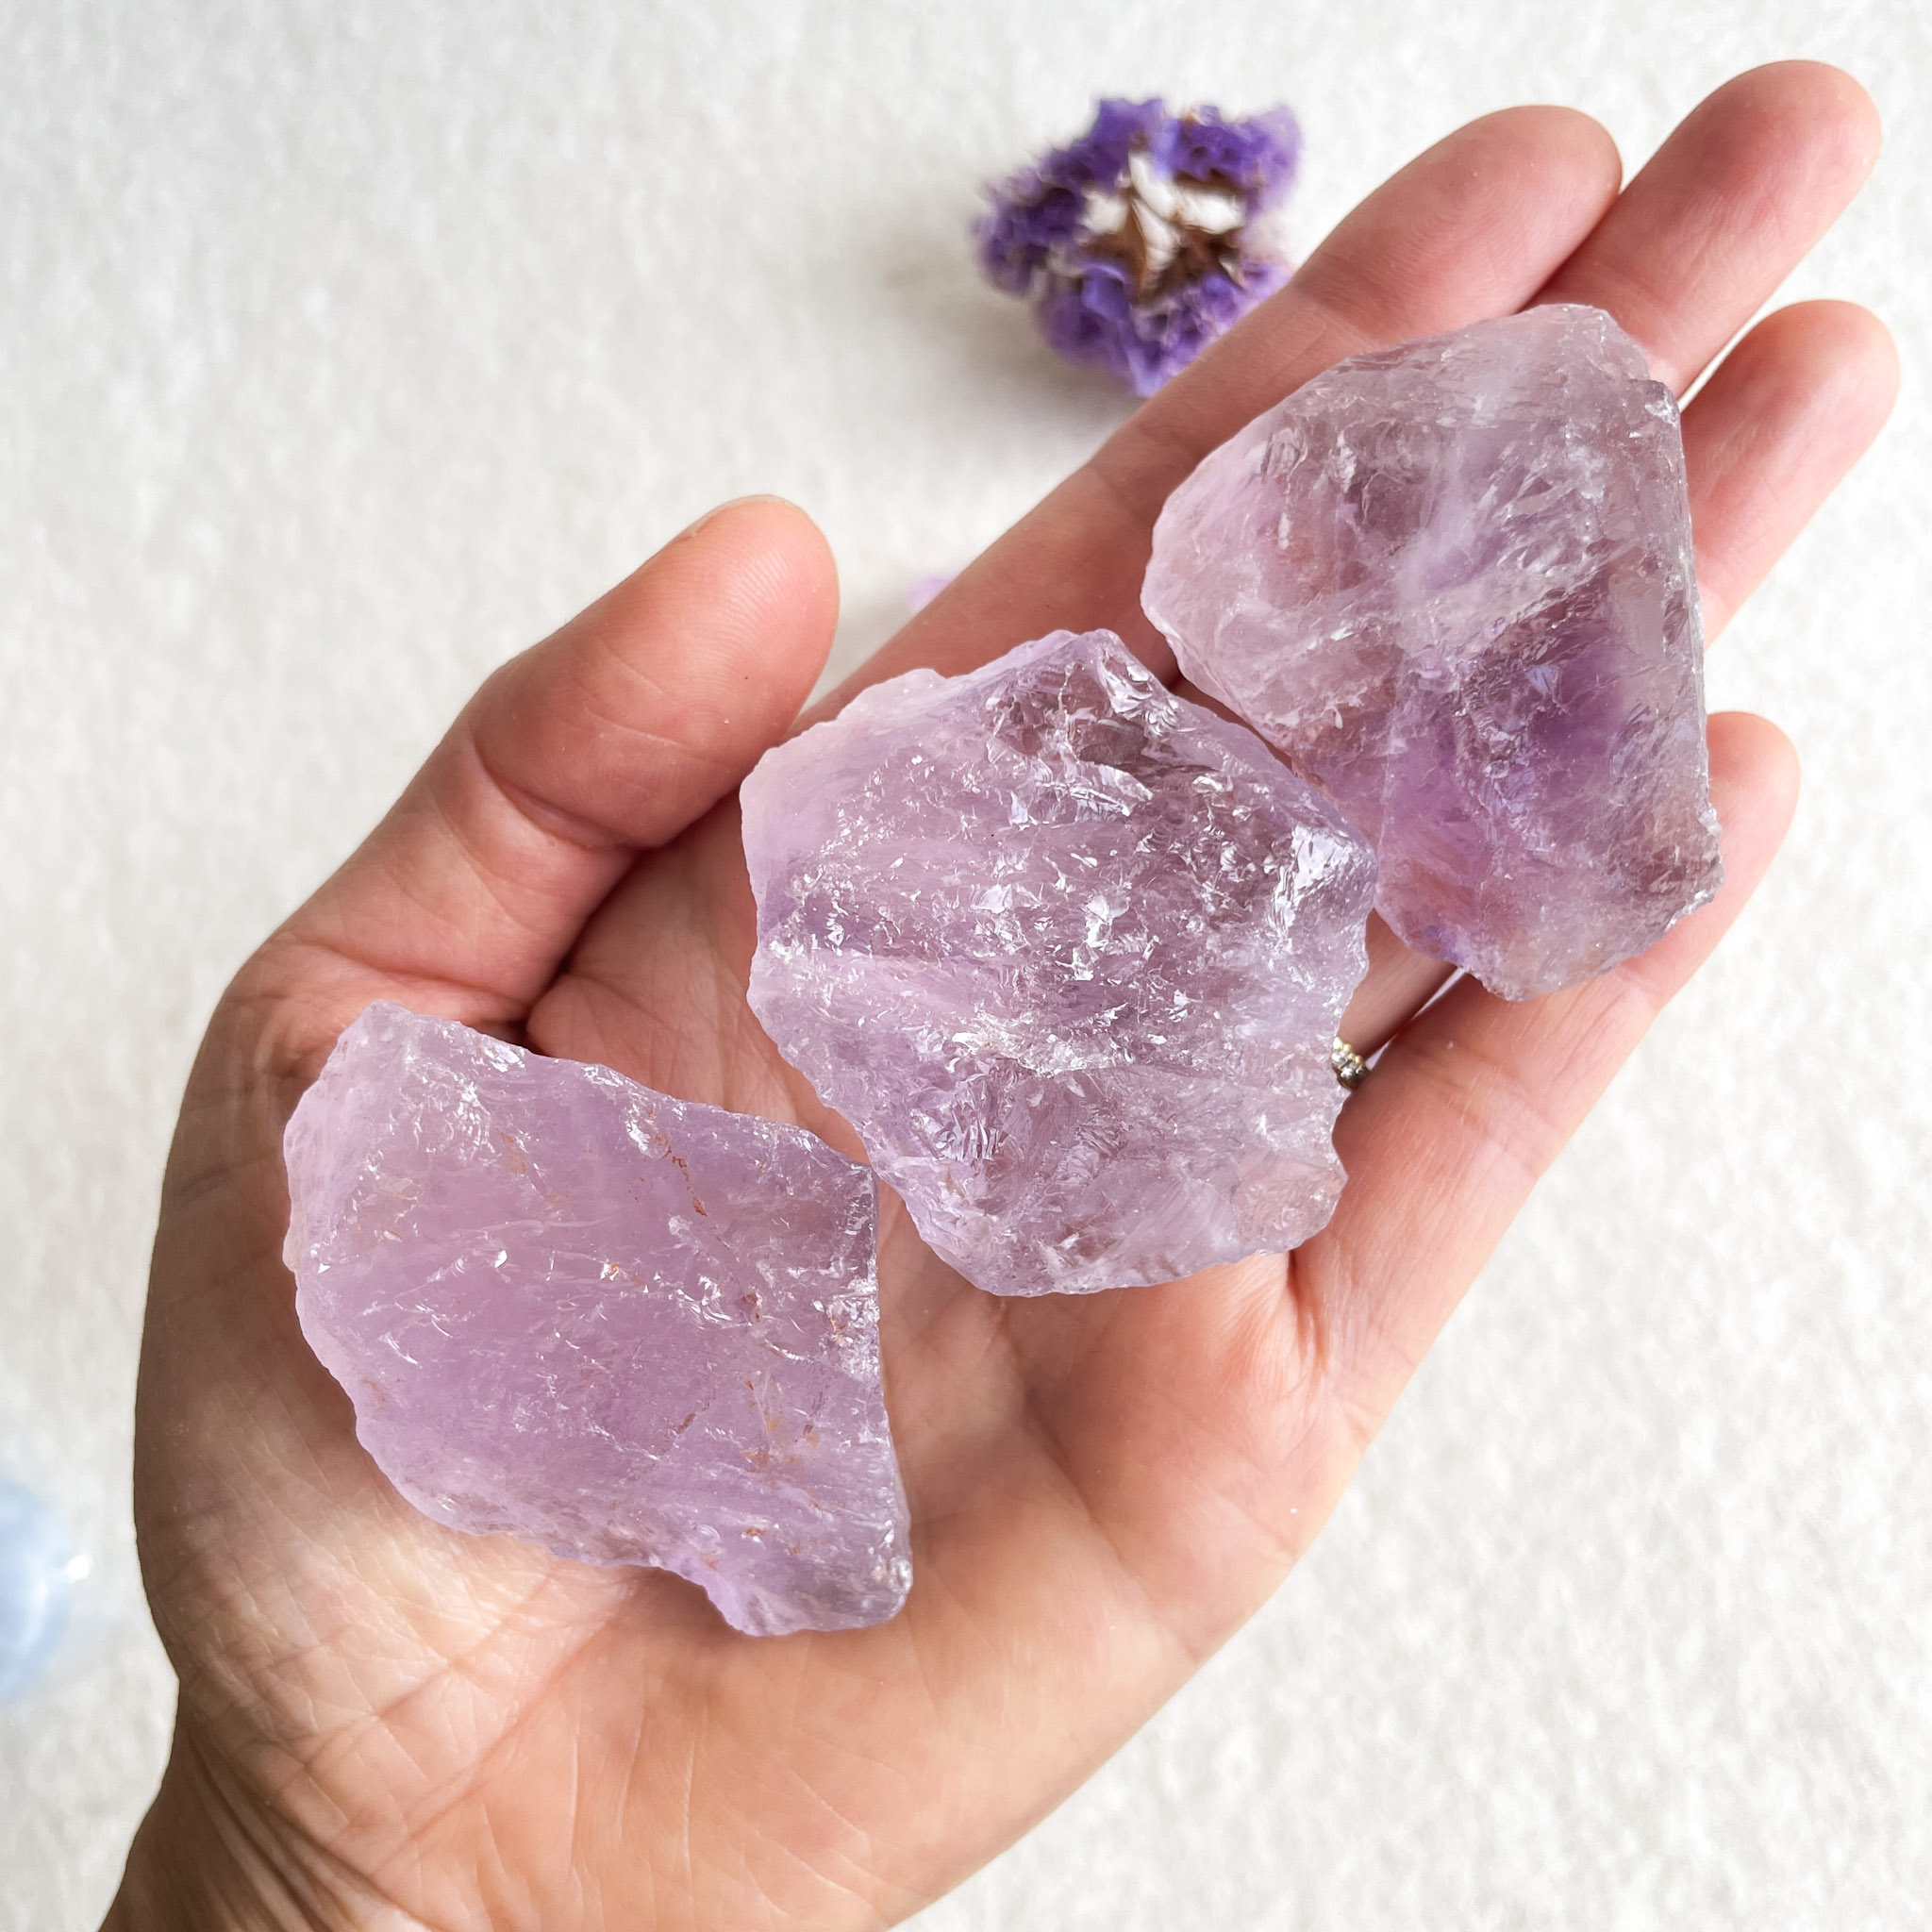 A person is holding three large, unpolished amethyst crystals in the palm of their hand against a white background with a small purple flower blurred in the background.